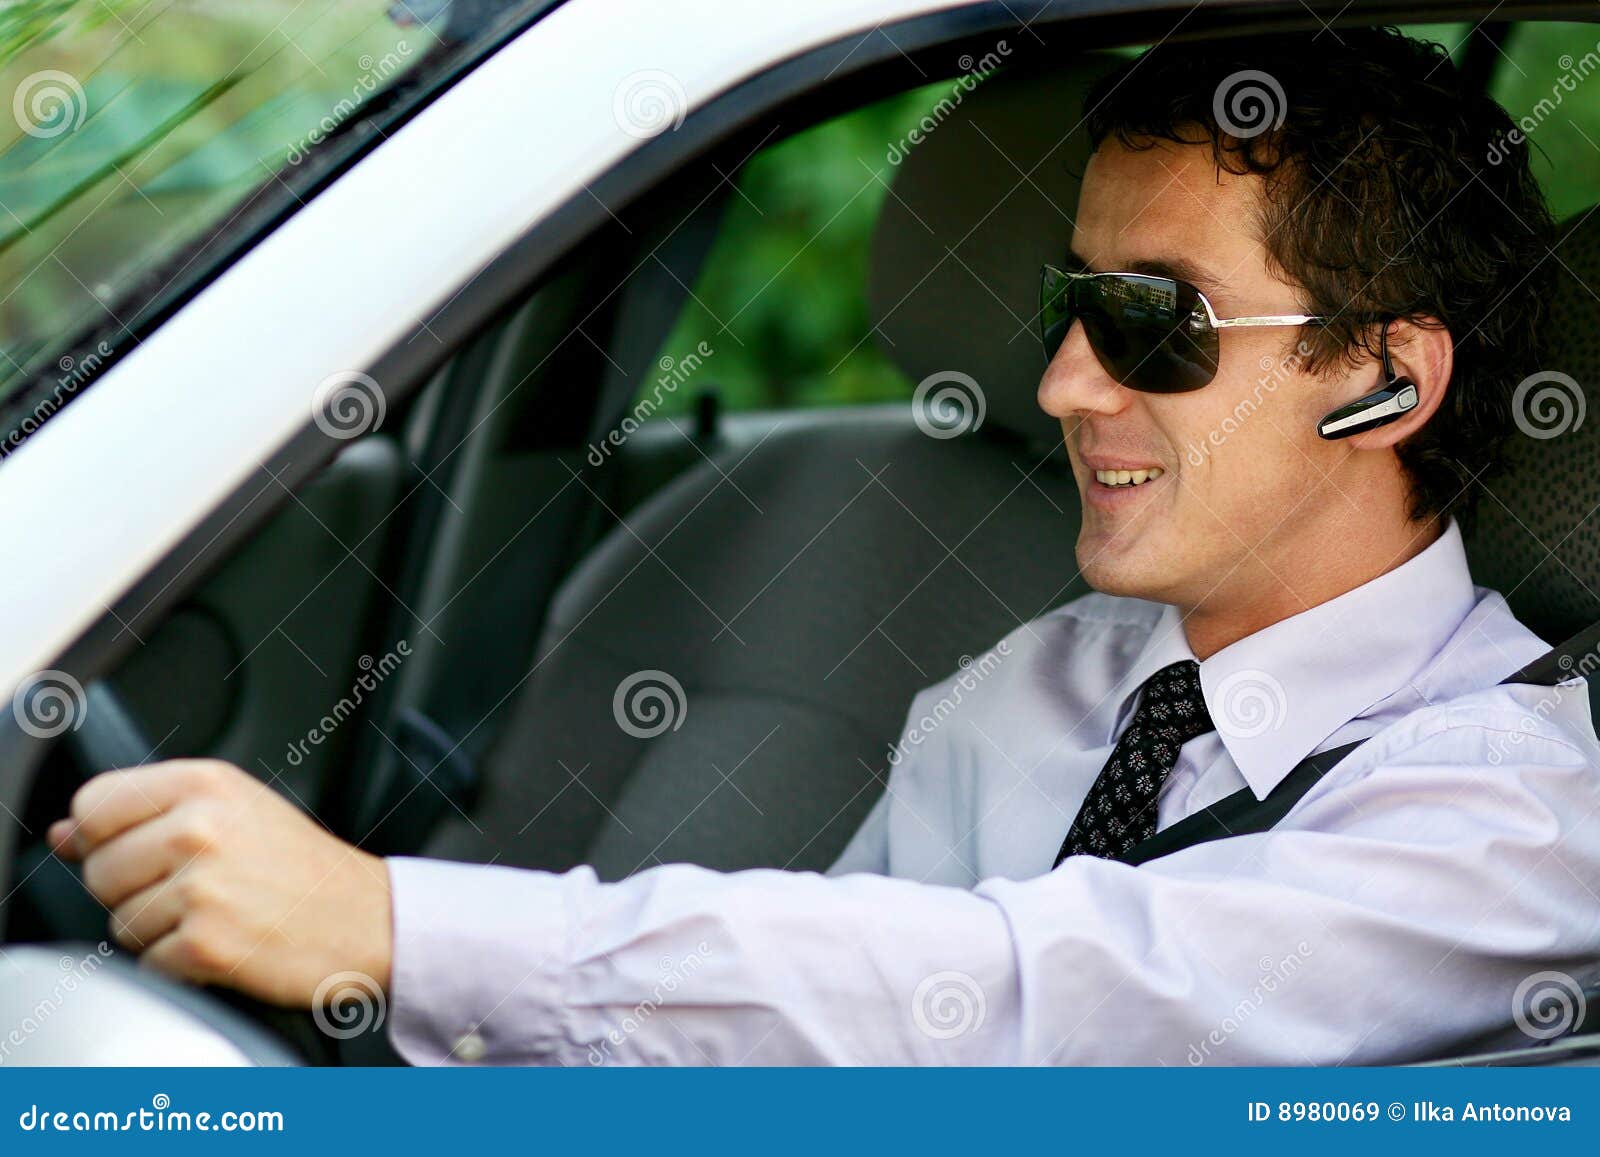 Businessman Driving with Bluetooth Stock Image - Image of bluetooth, driving:  8980069